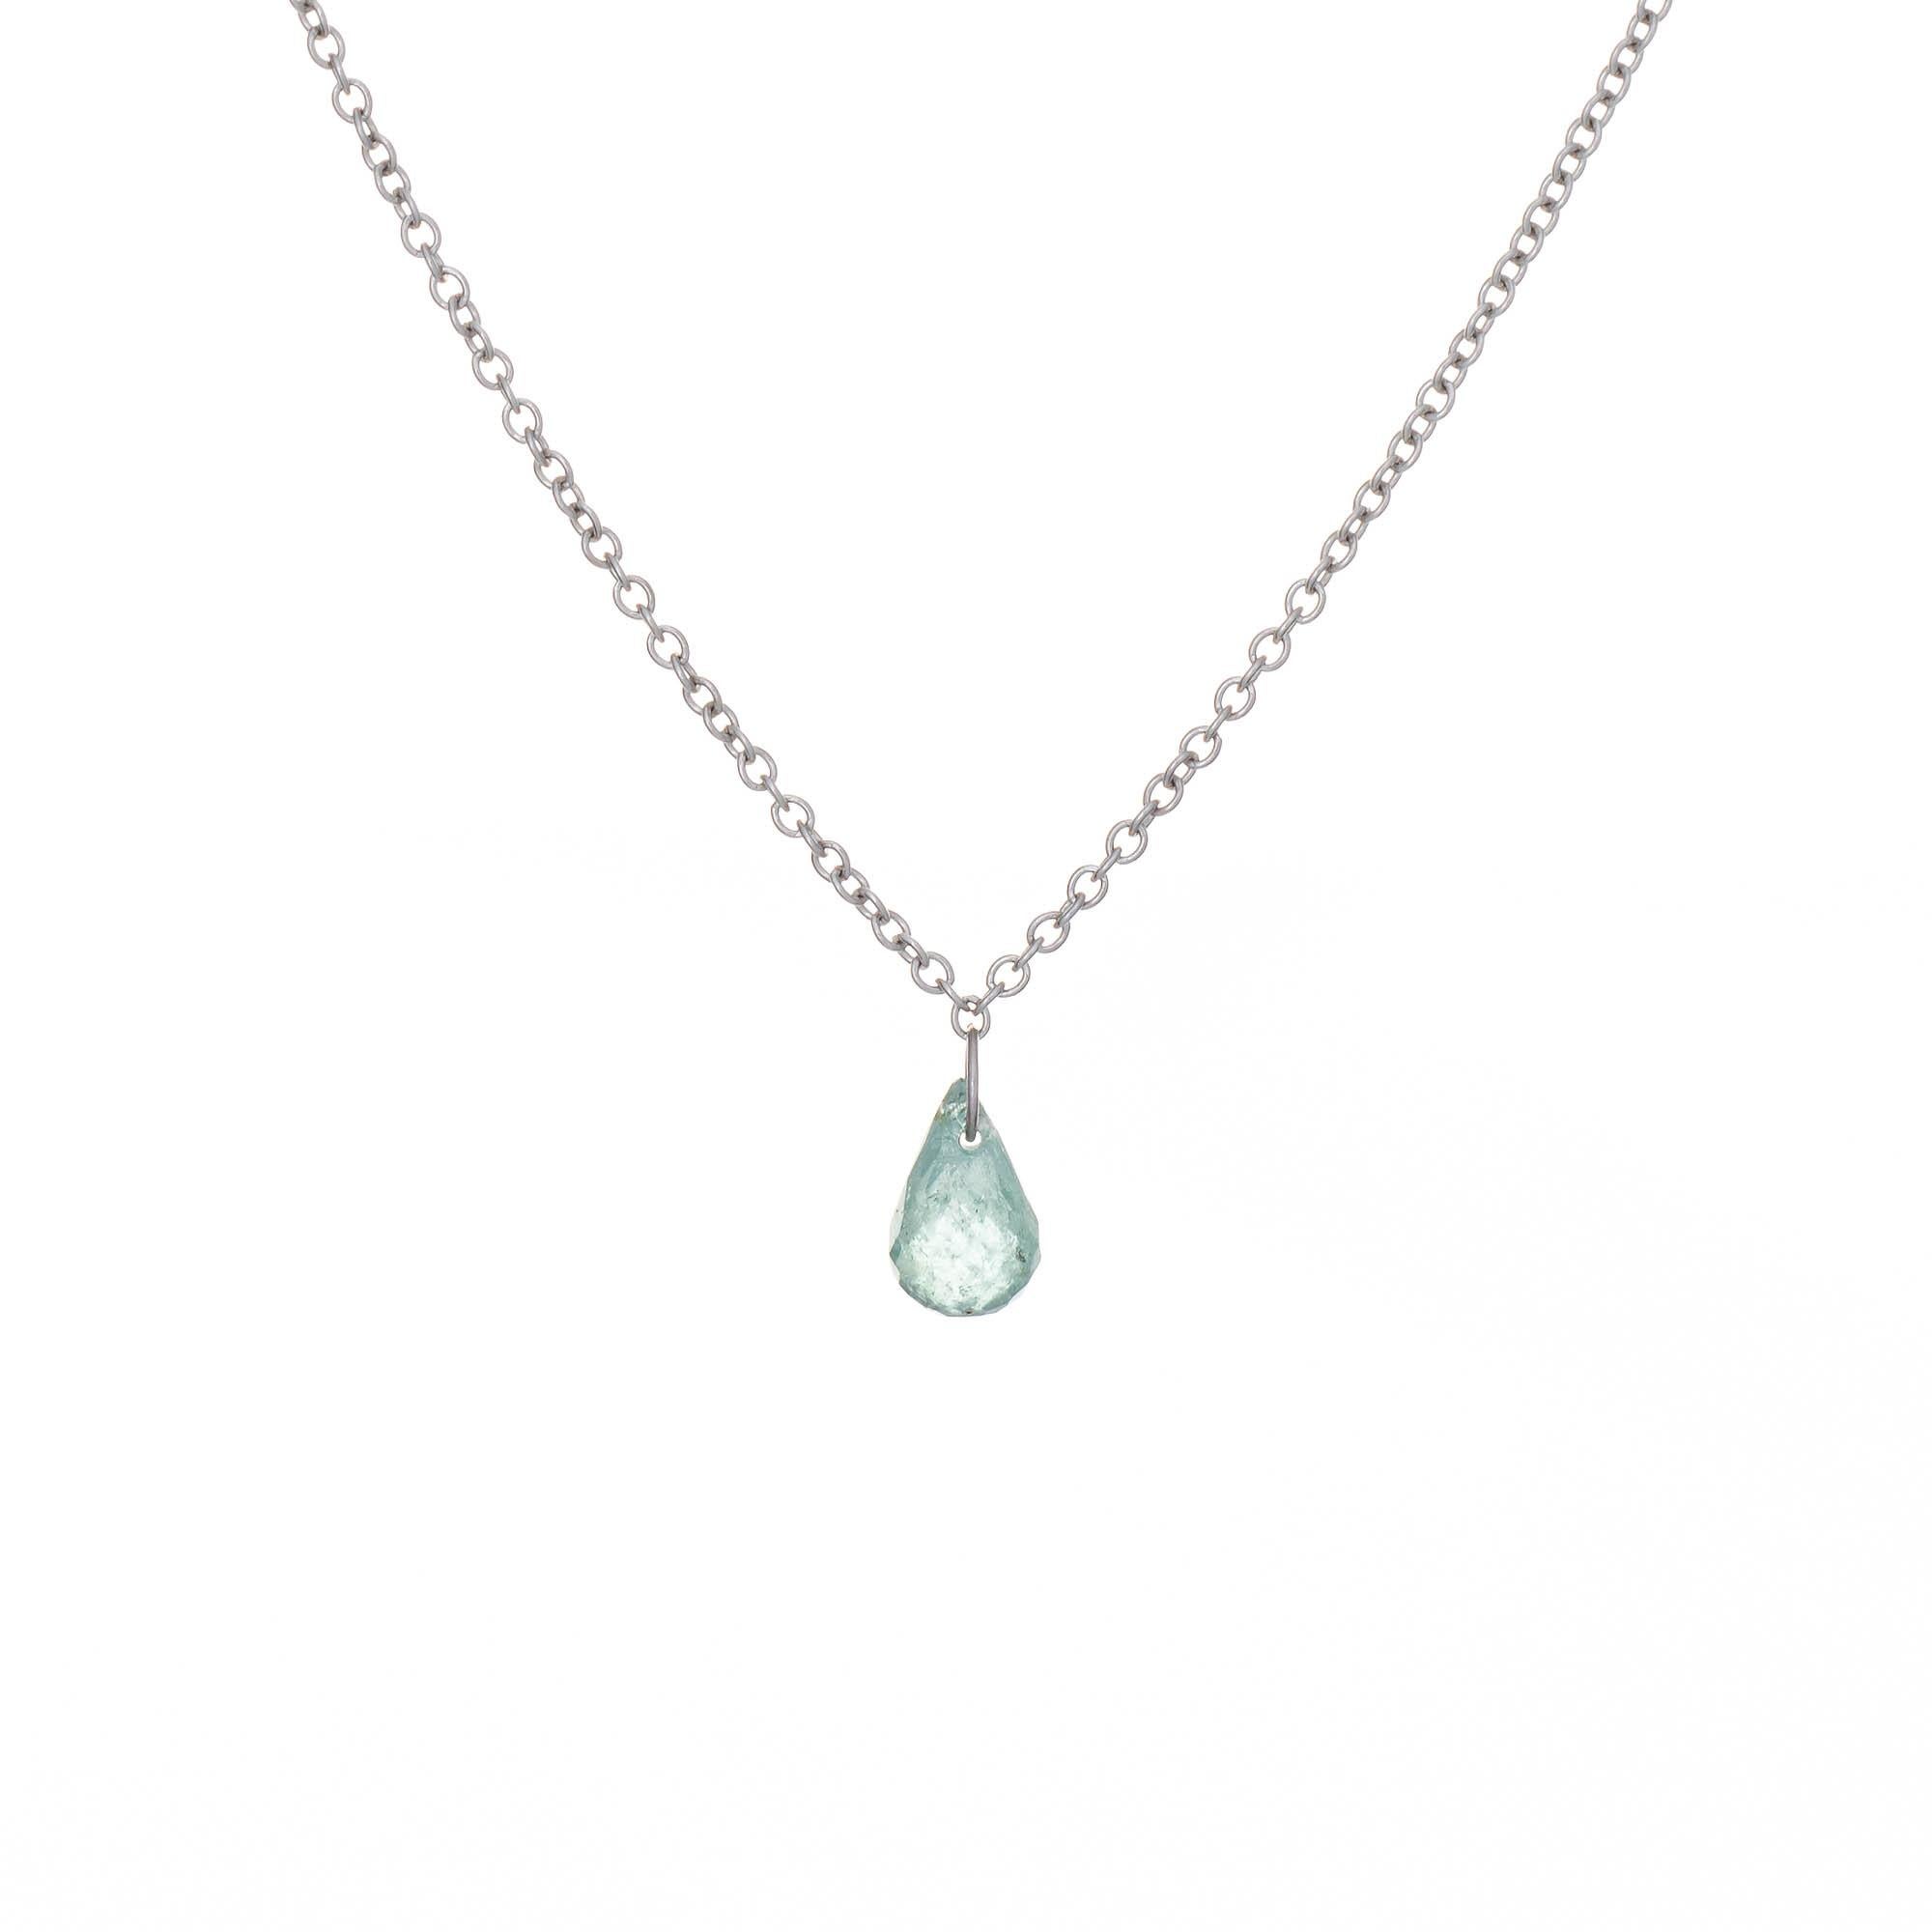 Stylish aquamarine necklace crafted in 14 karat white gold.  

Aquamarine briolette measures 6.3mm x 4mm (in excellent condition and free of cracks or chips). 

The small aquamarine is suspended from a small wire hoop, allowing the aquamarine to